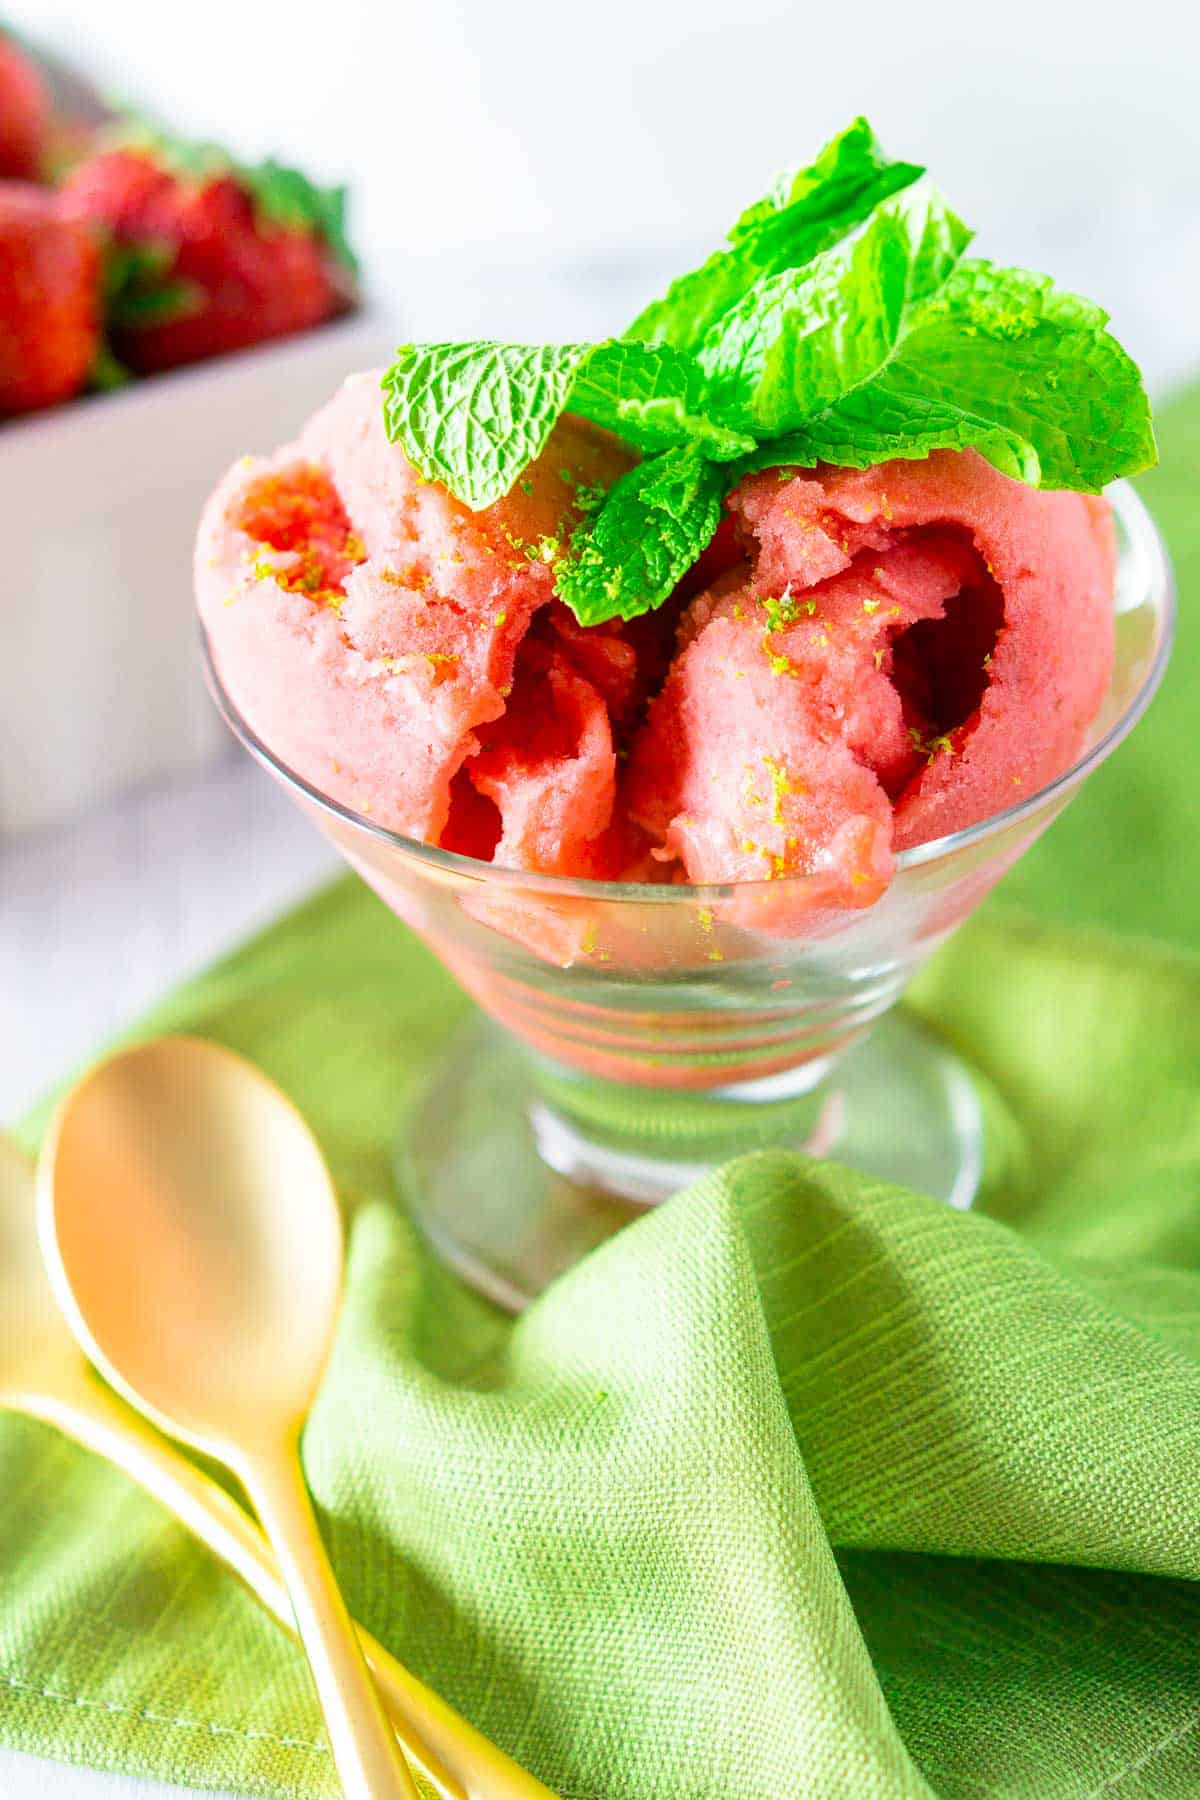 A close-up of the strawberry mojito sorbet on a green napkin with gold spoons to the side.